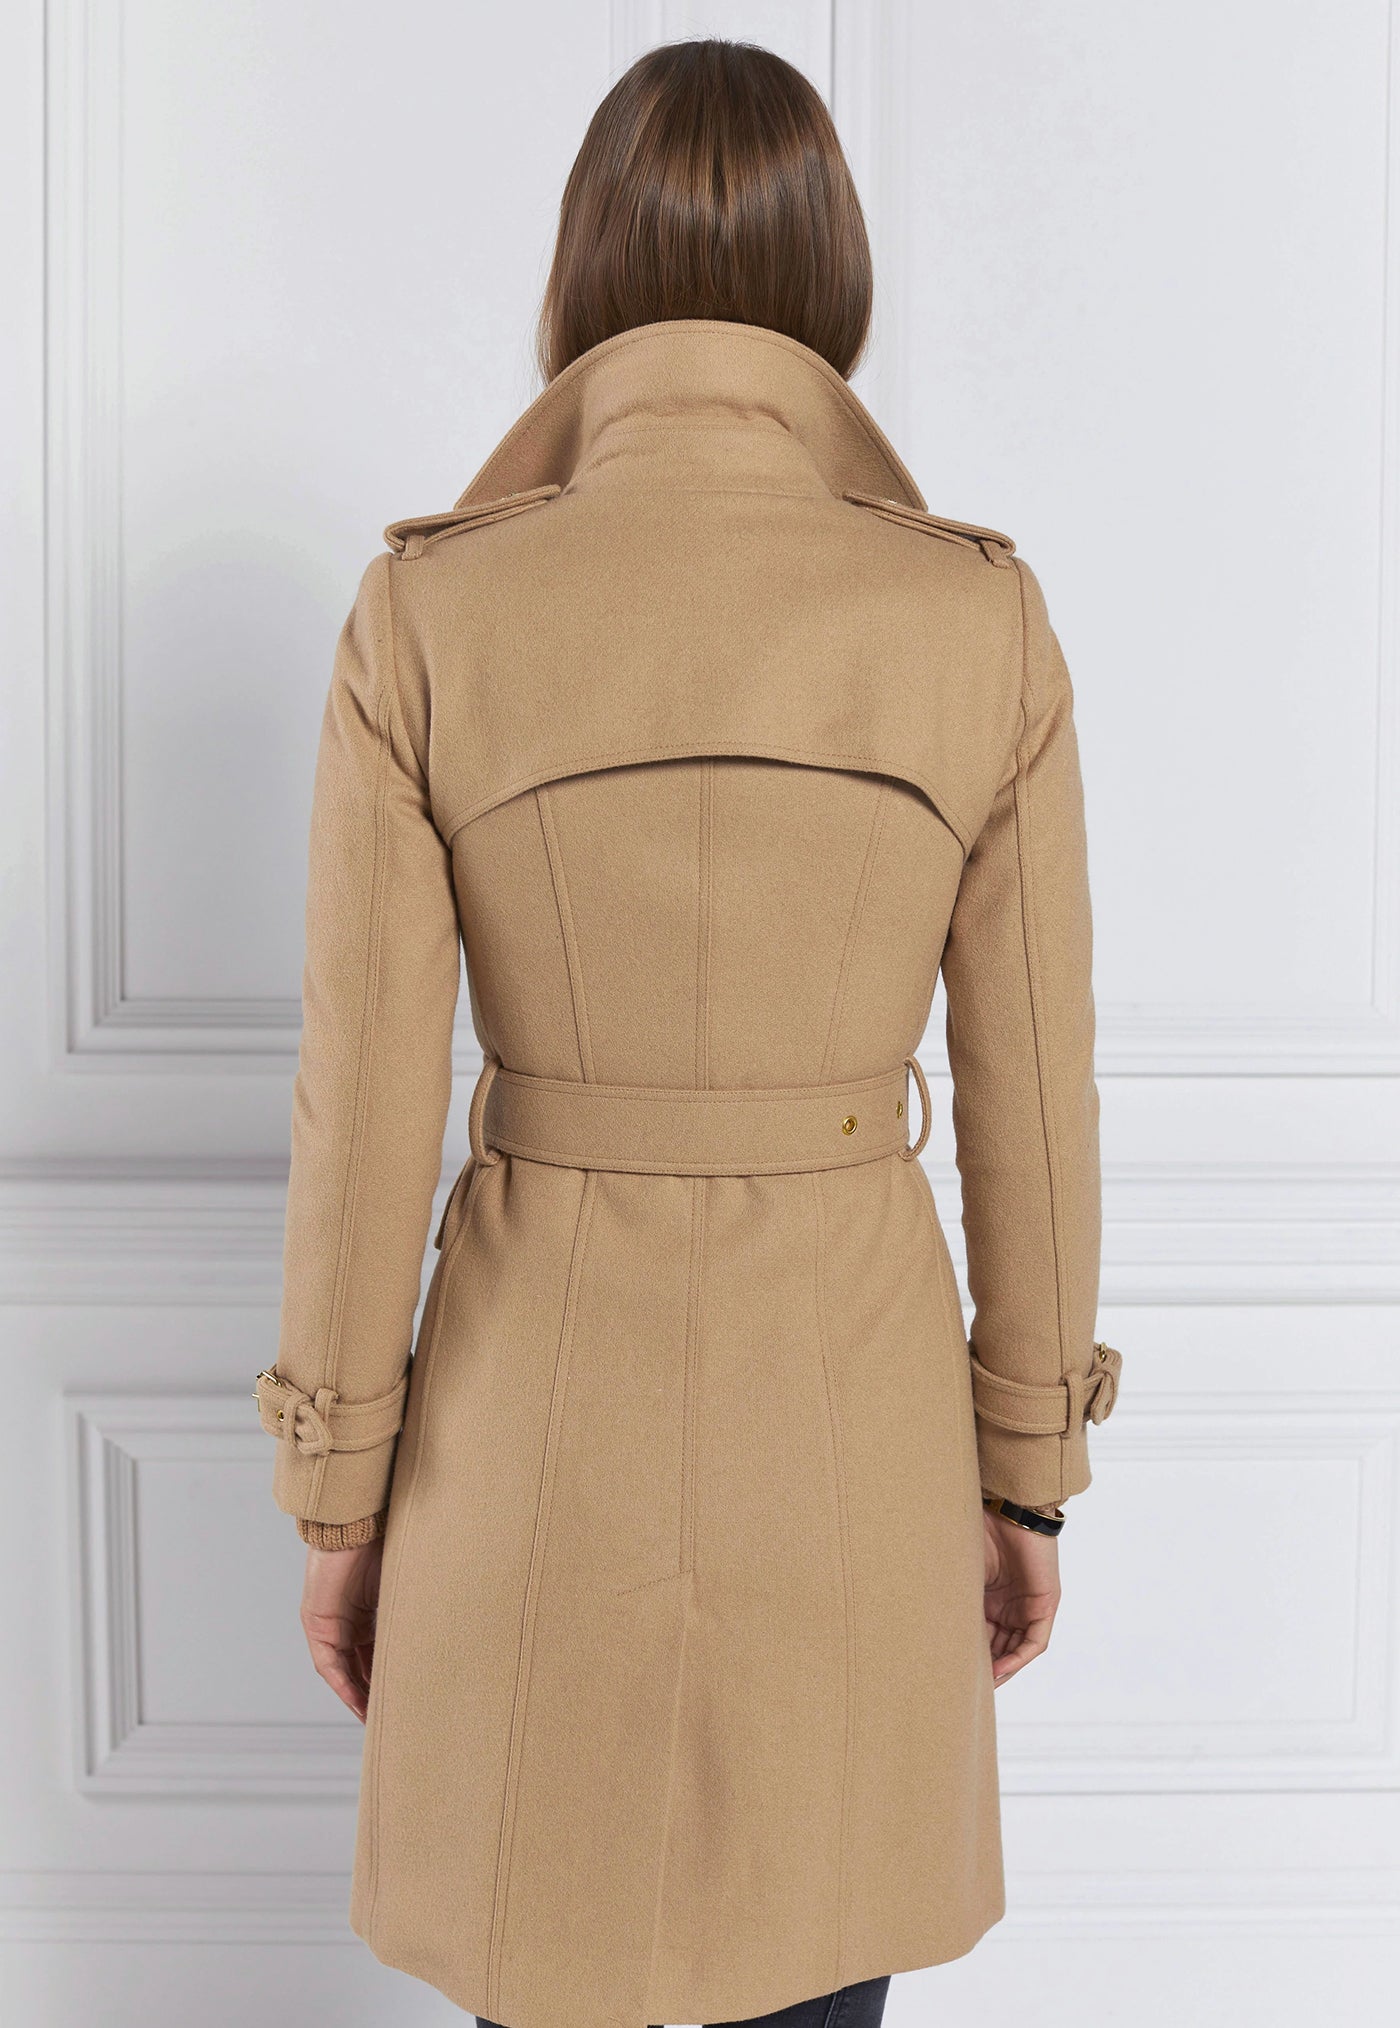 Marlborough Trench Coat - Camel sold by Angel Divine